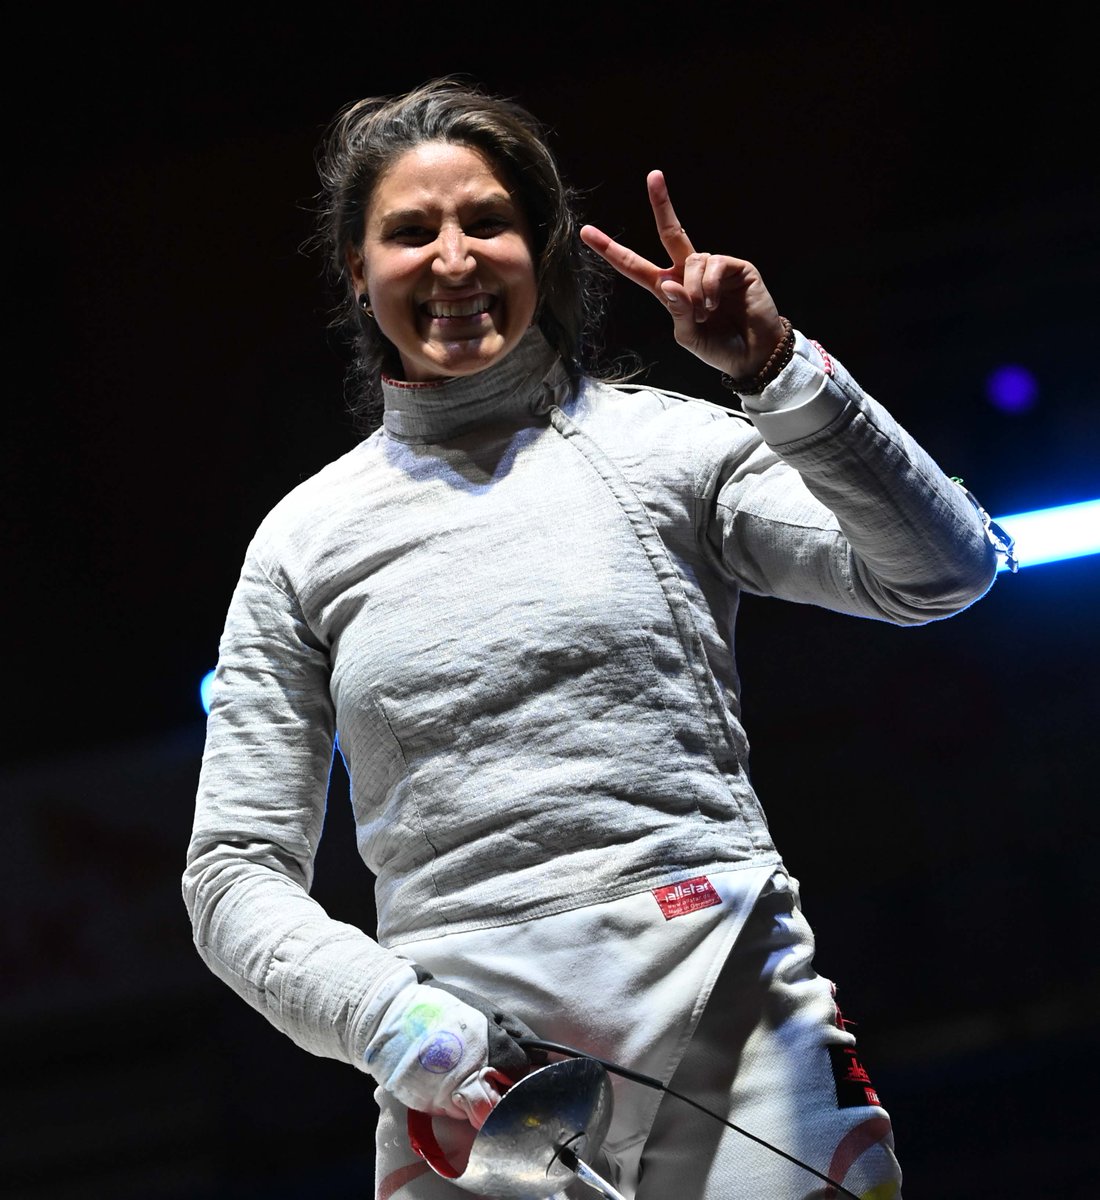 Congrats to Araceli Navarro🇪🇸 for winning her maiden GP title at the 2024 Seoul Sabre Grand Prix!🏆 She emerged victorious in the final duel against Sarah Noutcha🇫🇷in with an impressive score of 15-13! #fencing #Fencinggrandprix #FIEGrandPrix #sabre 📸 #BizziTeam/ Eva Pavia